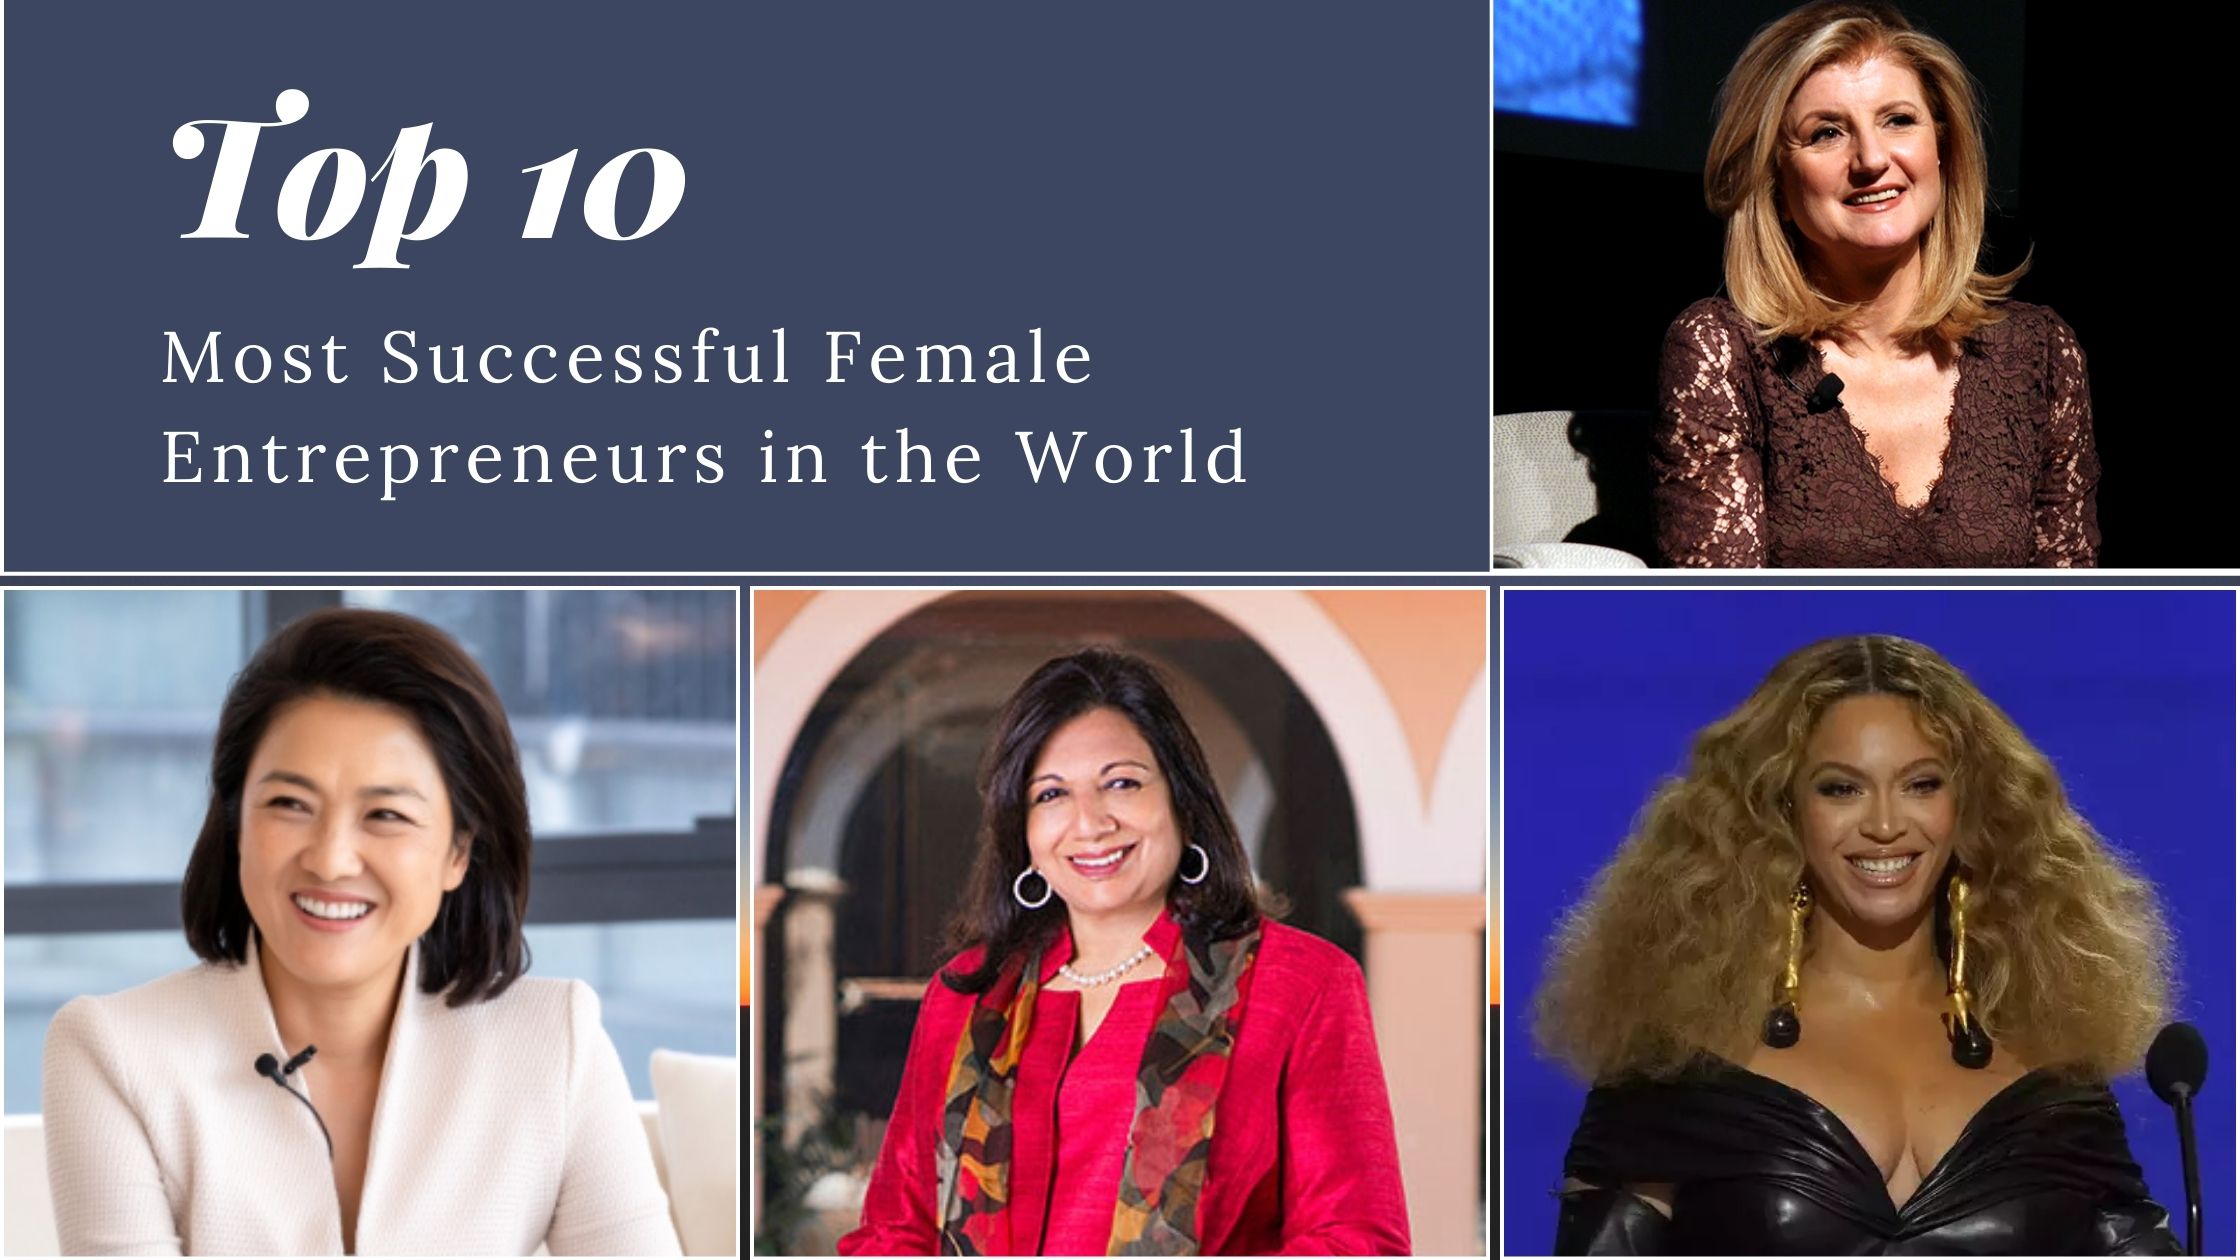 Top 10 Most Successful Female Entrepreneurs in the World